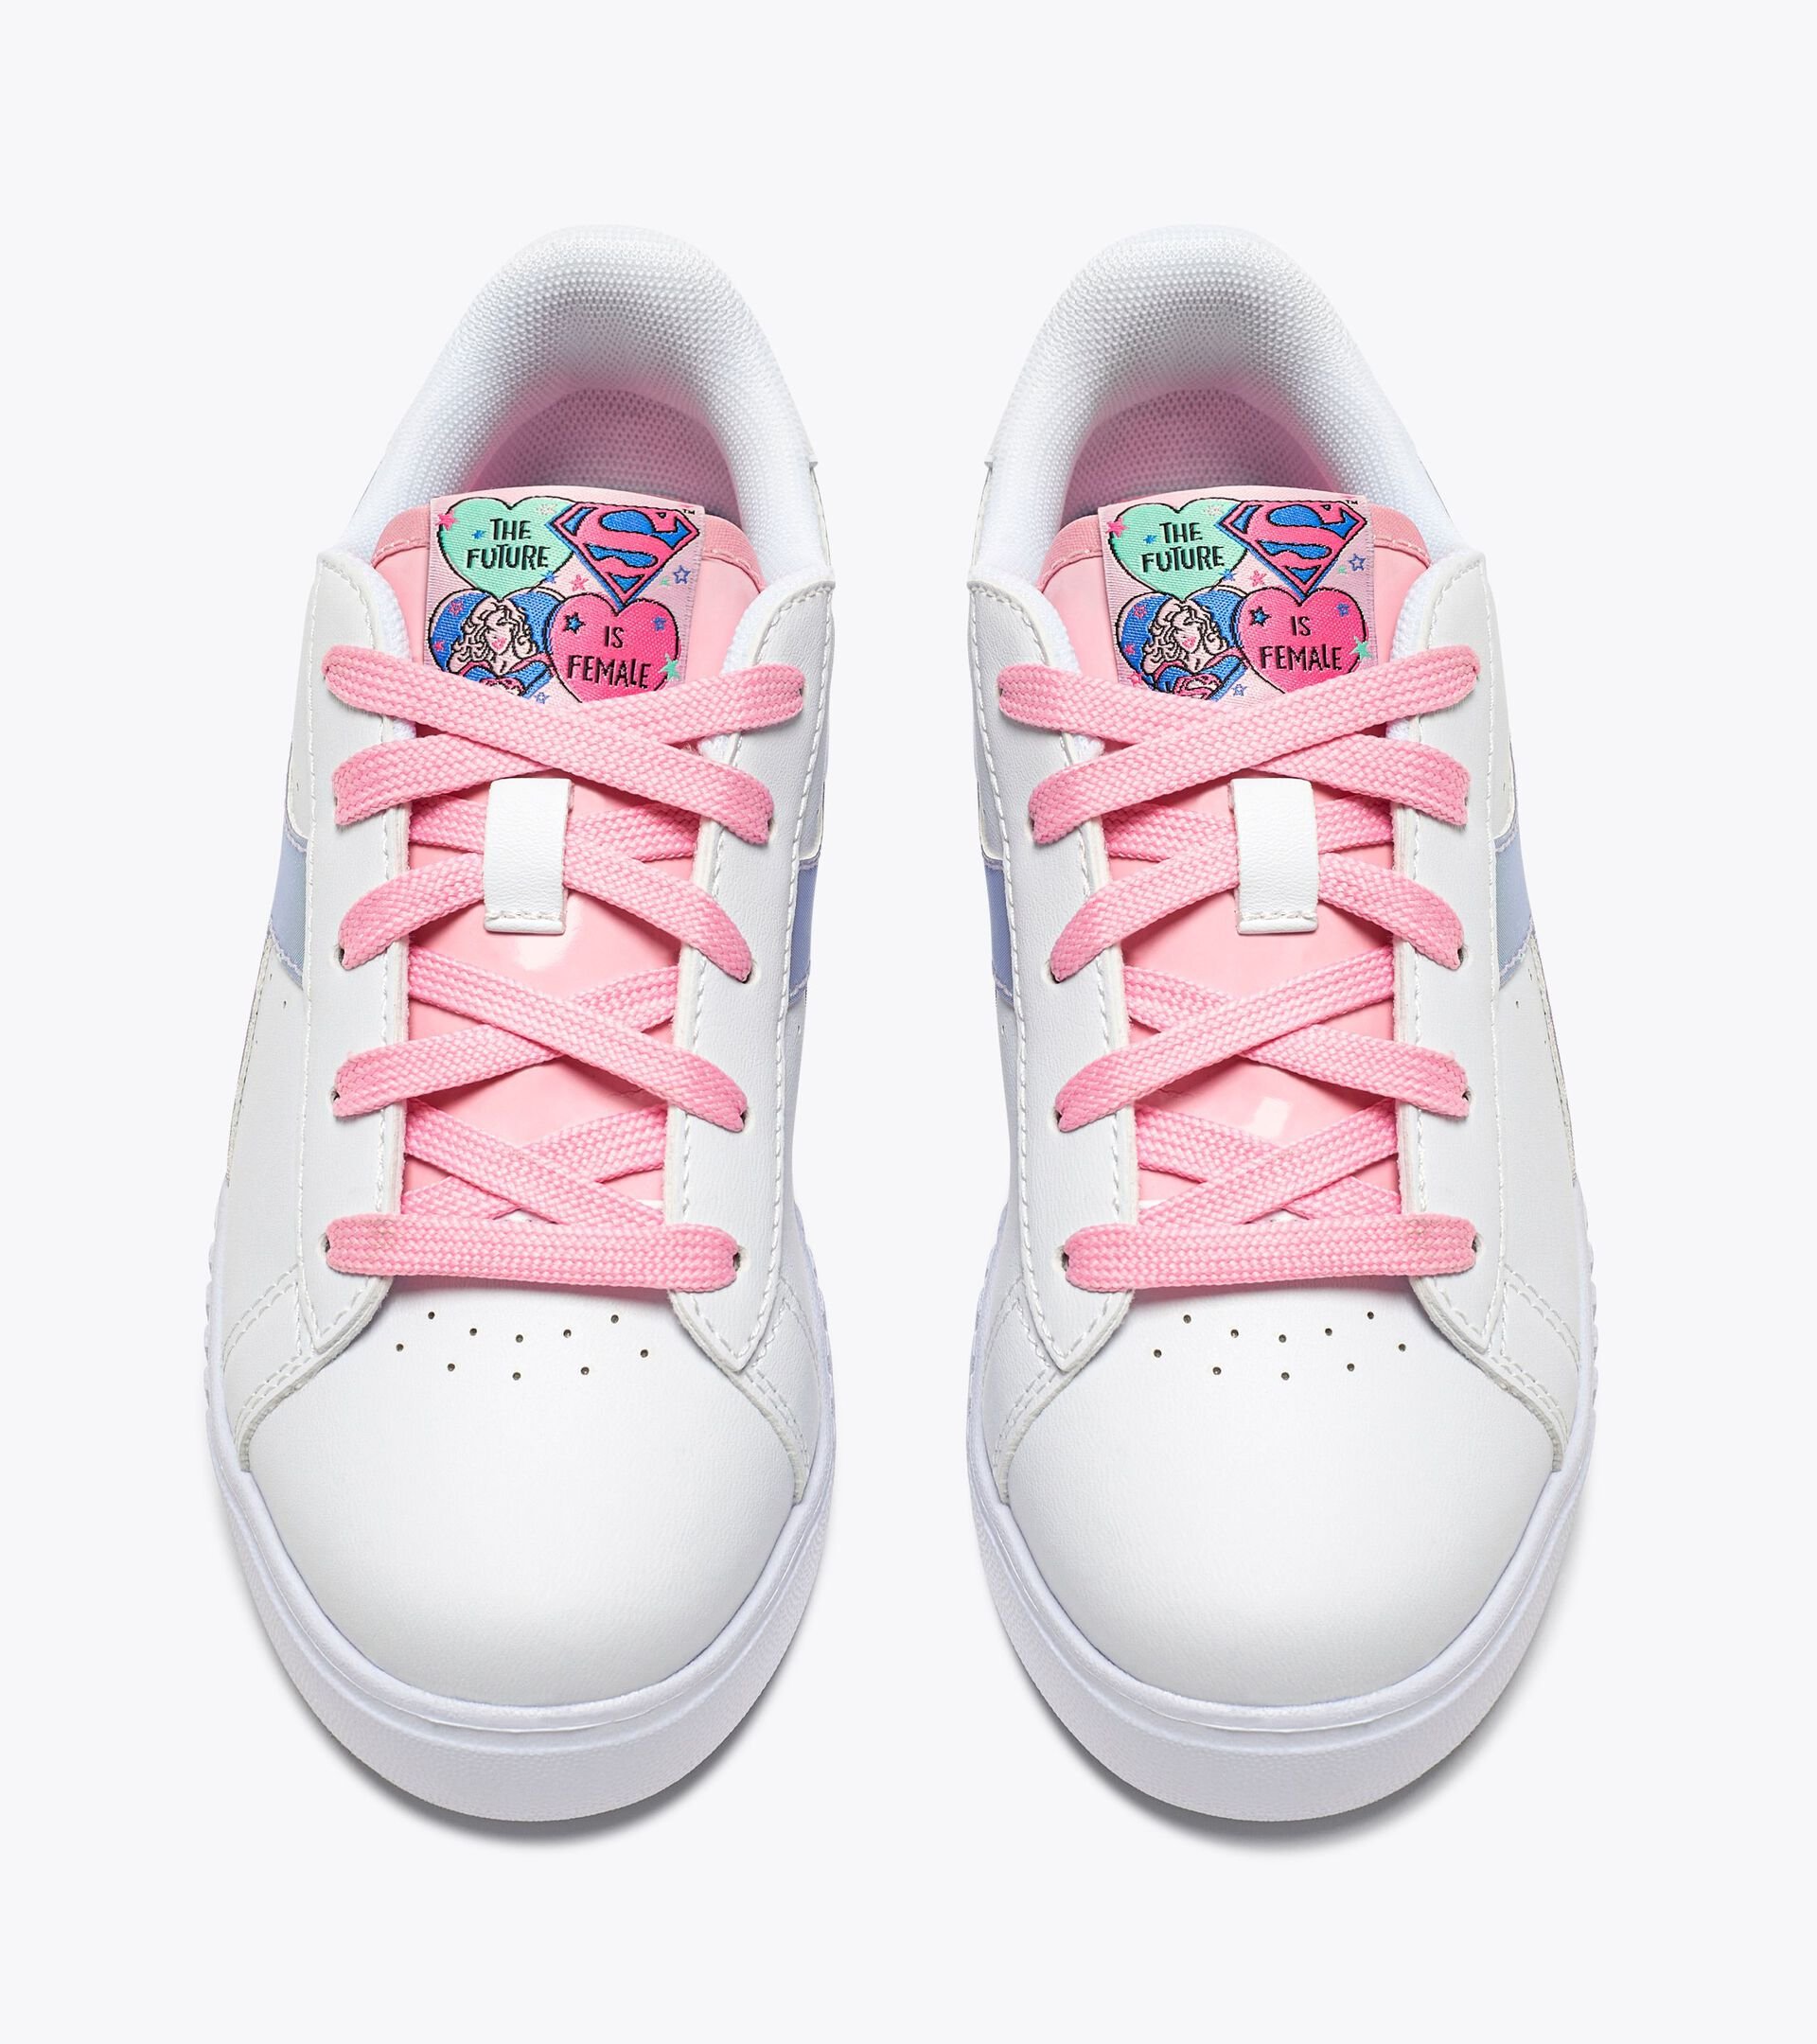 Sports sneaker - Girls - 4 to 8 years old  GAME STEP  P PS SUPERGIRL WHITE/ORCHID ICE - Diadora